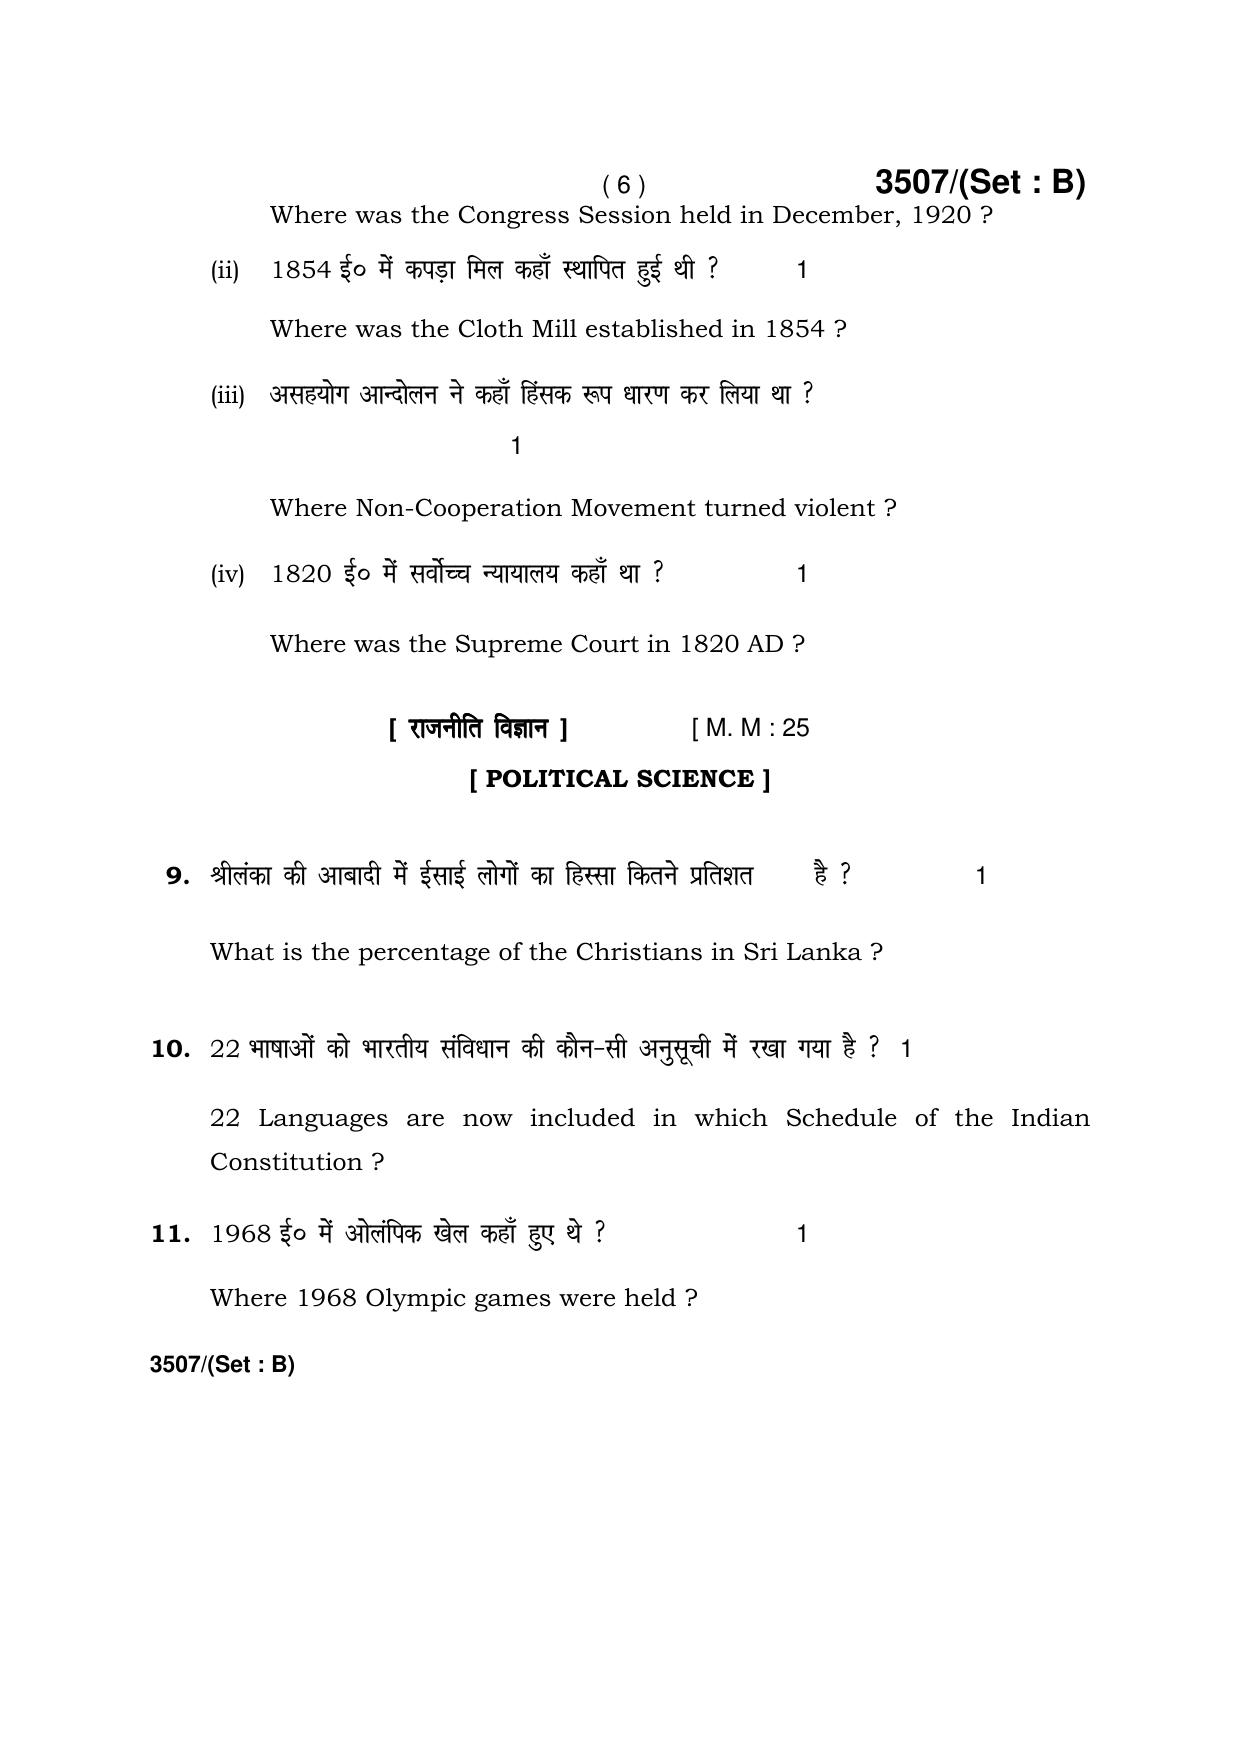 Haryana Board HBSE Class 10 Social Science -B 2018 Question Paper - Page 6